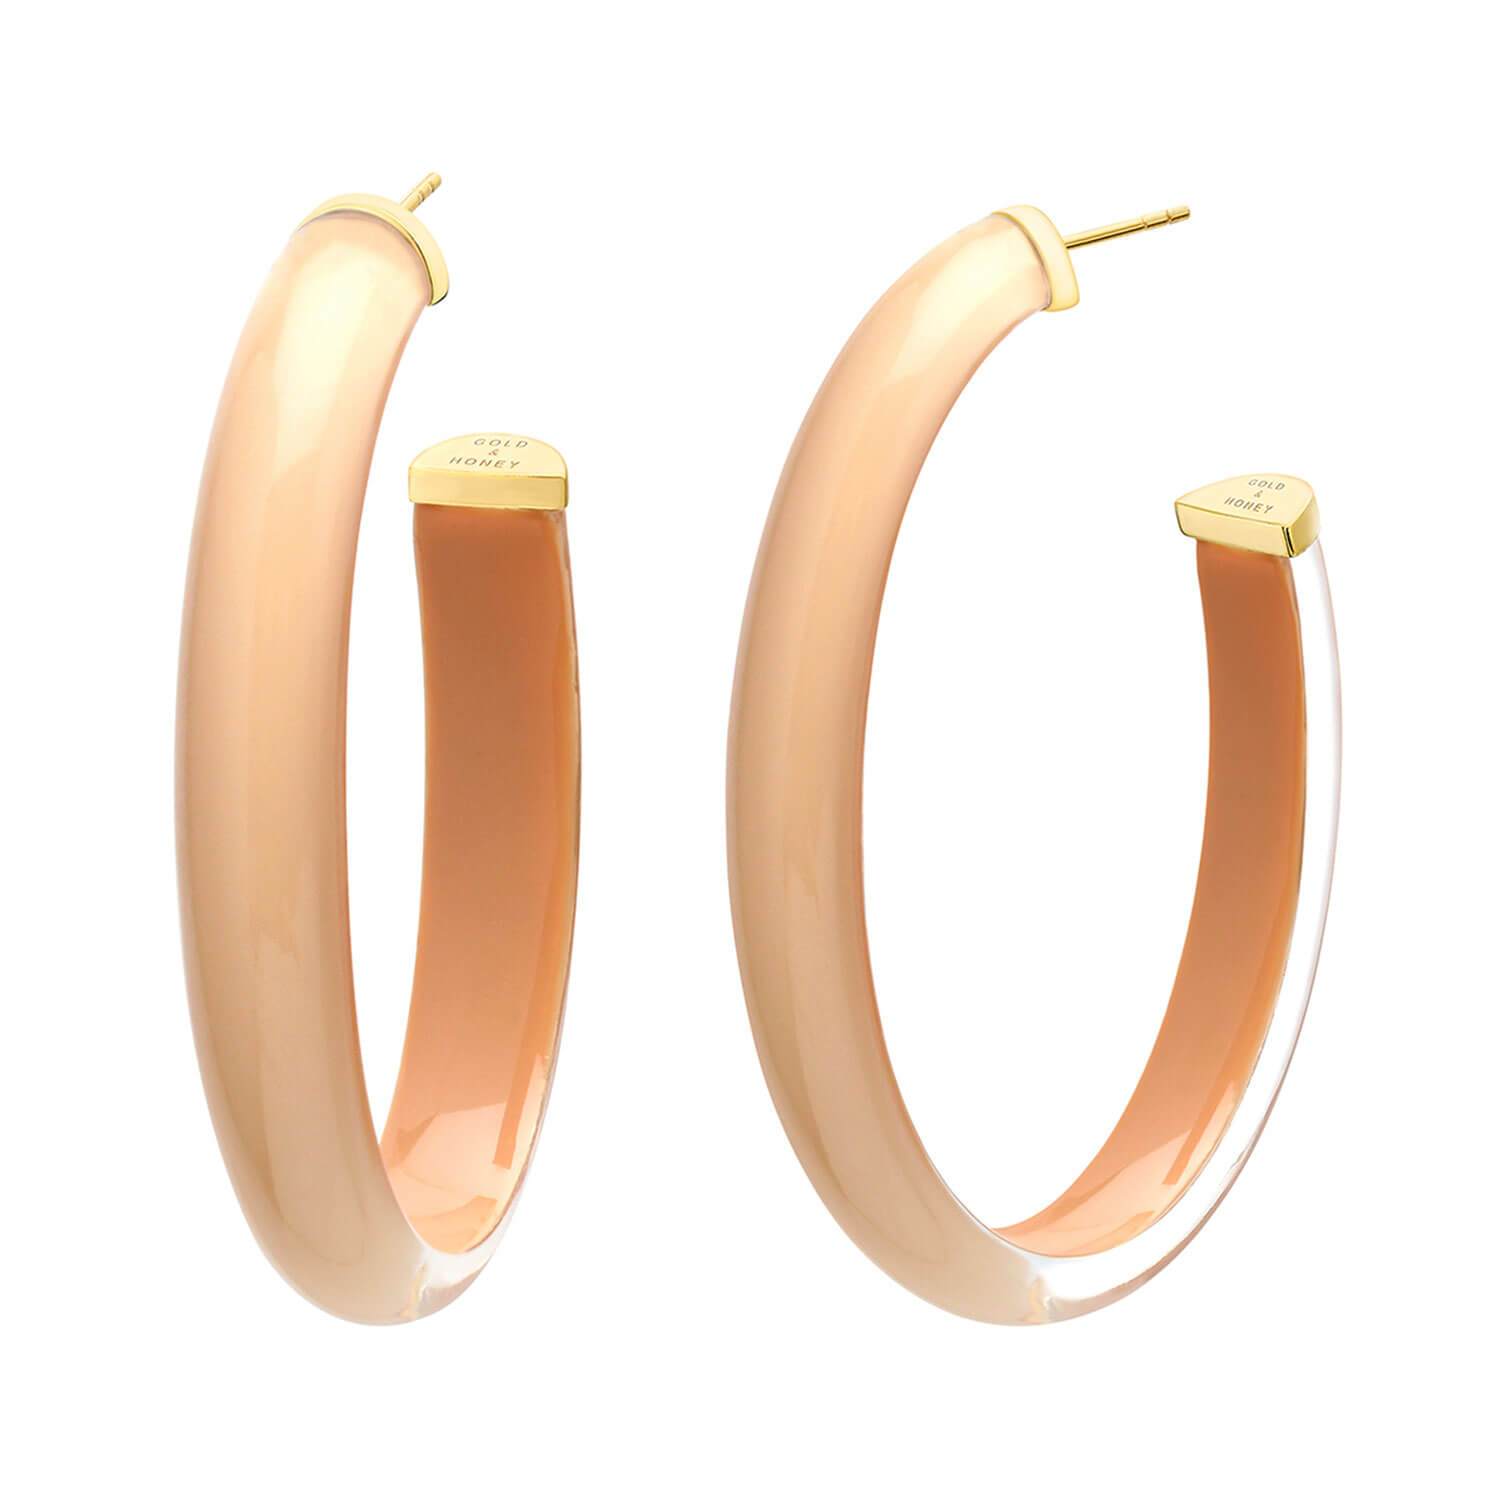 XL Oval Illusion Nude Lucite Hoops - NUDE4